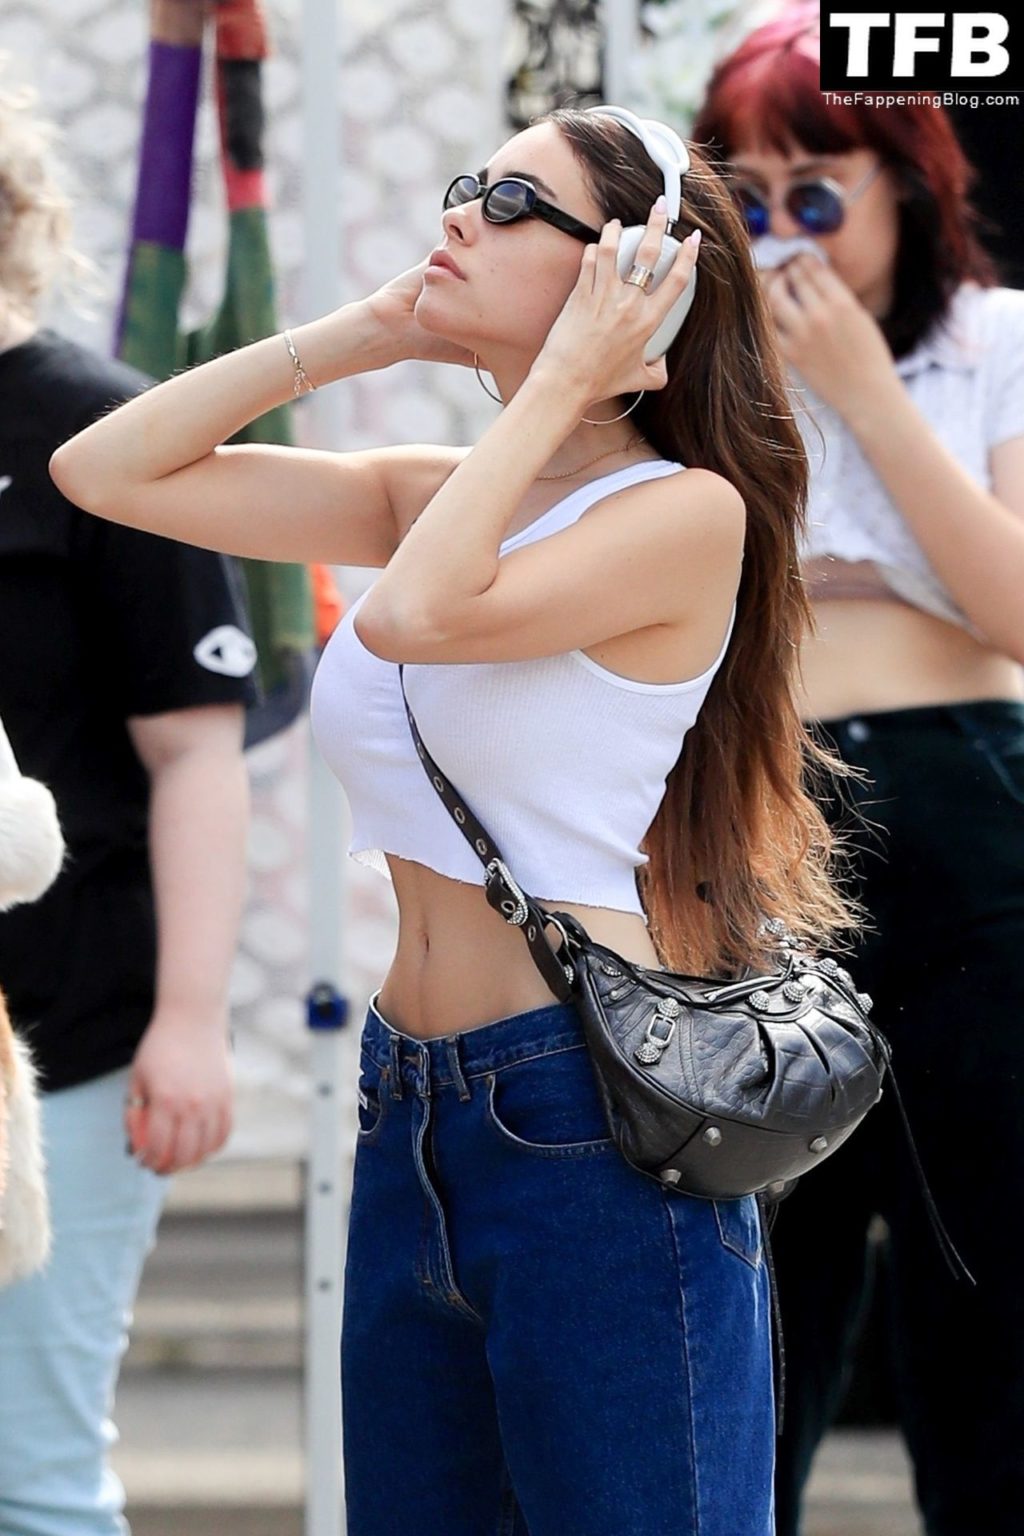 Madison Beer Sexy The Fappening Blog 23 1024x1536 - Madison Beer Wears a Tiny Crop Top Revealing a Toned Waist While Shopping in LA (39 Photos)